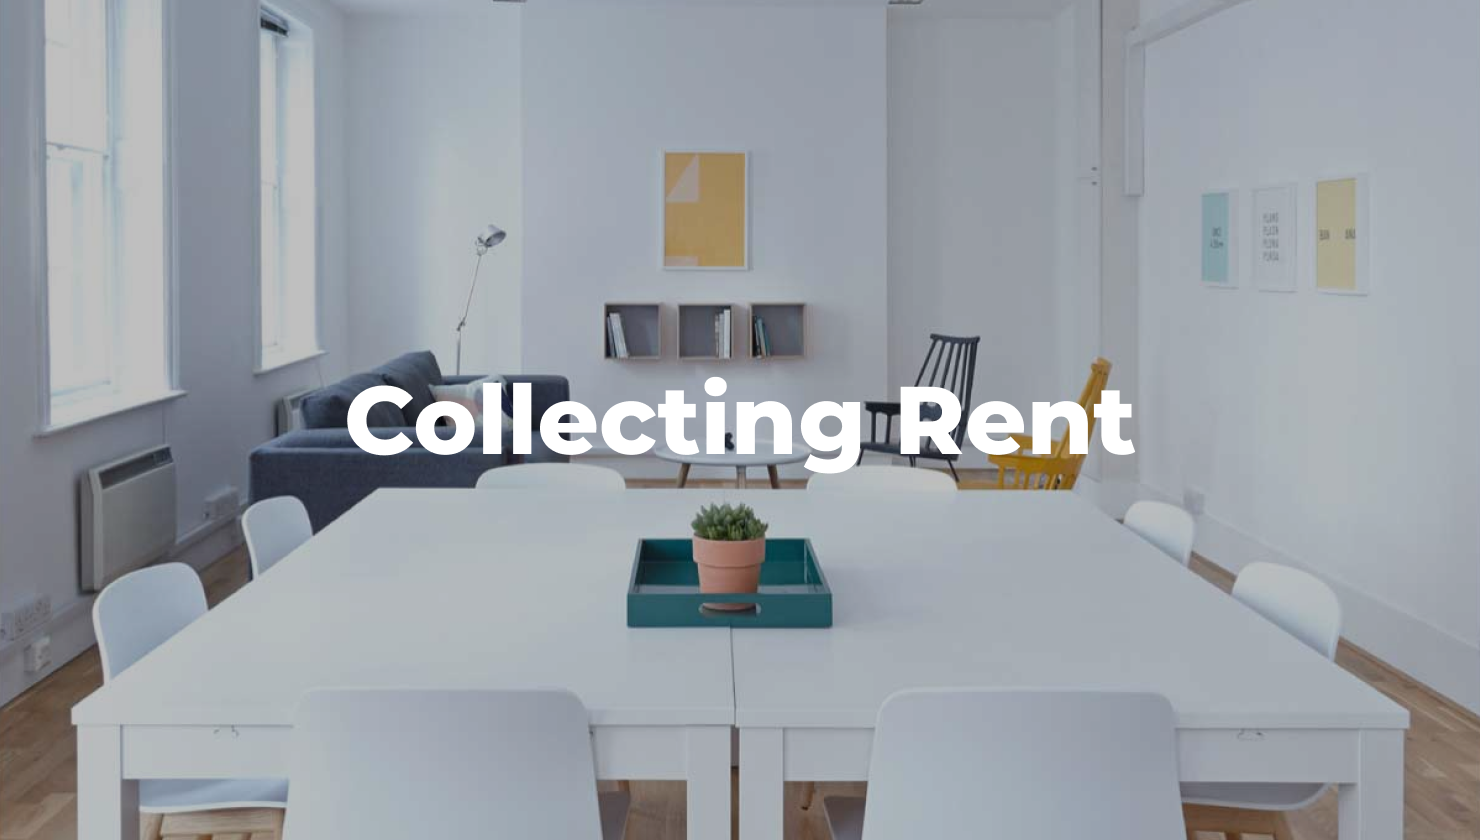 collecting rent